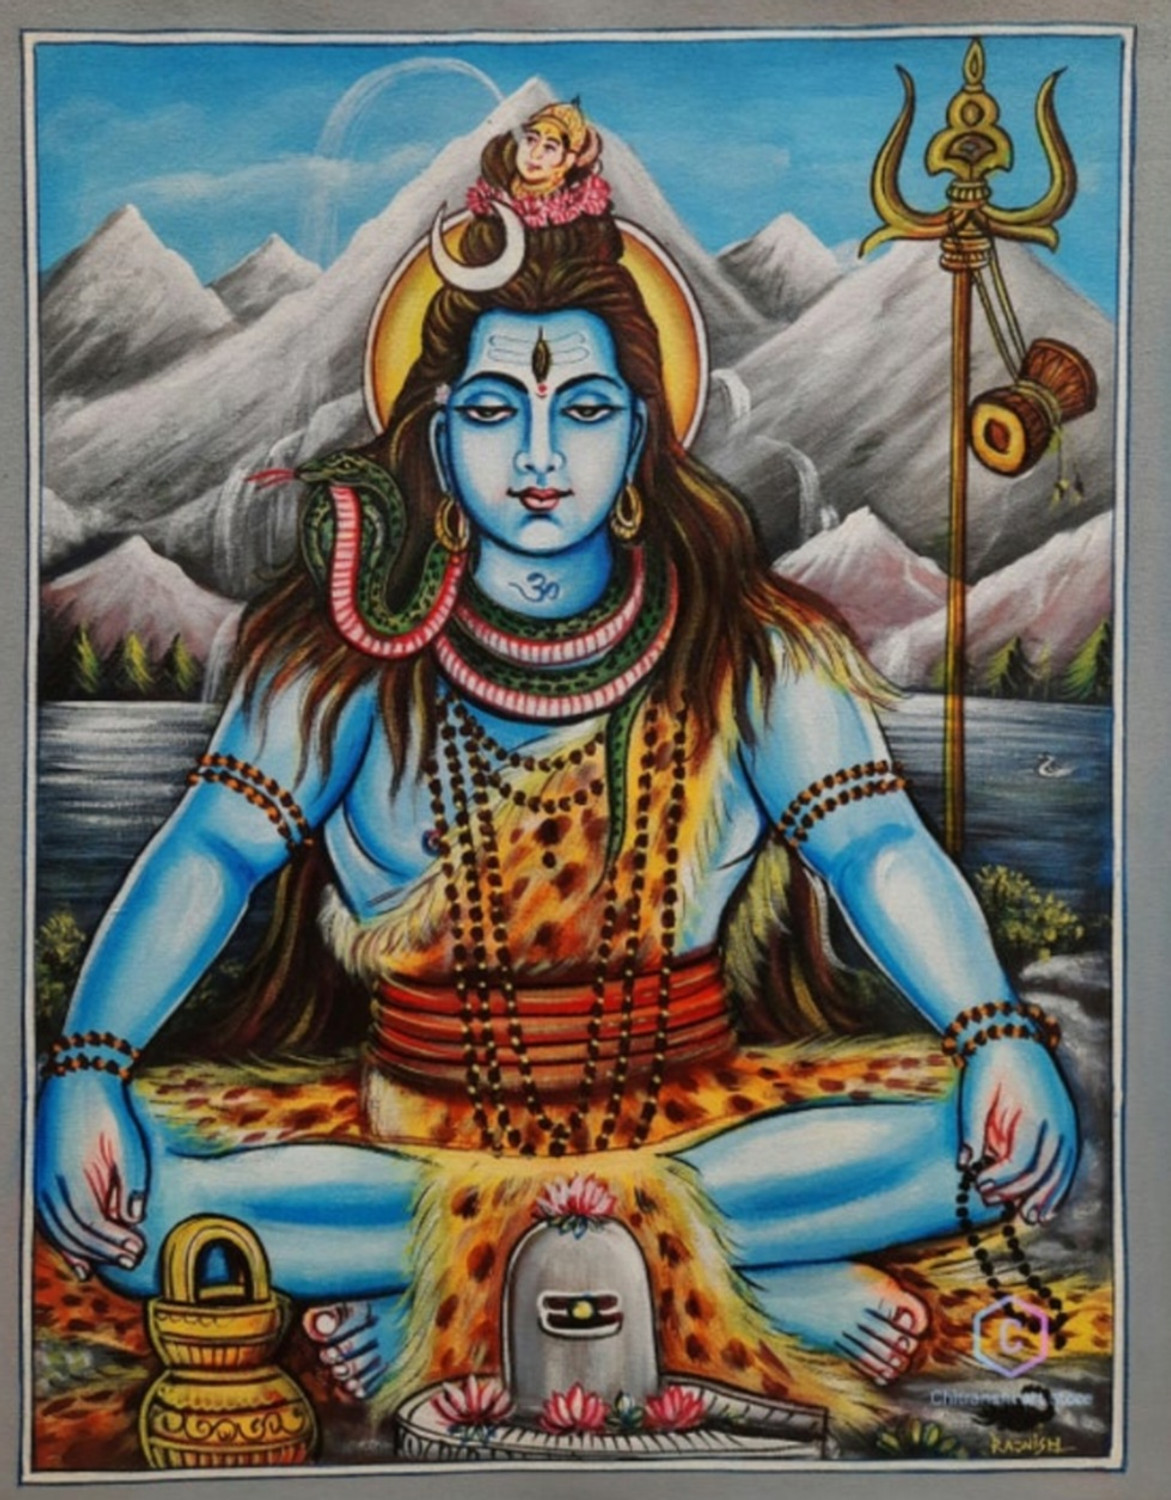 Shiv Ji (Mahadev) Multicolour Photo Print Poster Photographic Paper -  Religious posters in India - Buy art, film, design, movie, music, nature  and educational paintings/wallpapers at Flipkart.com